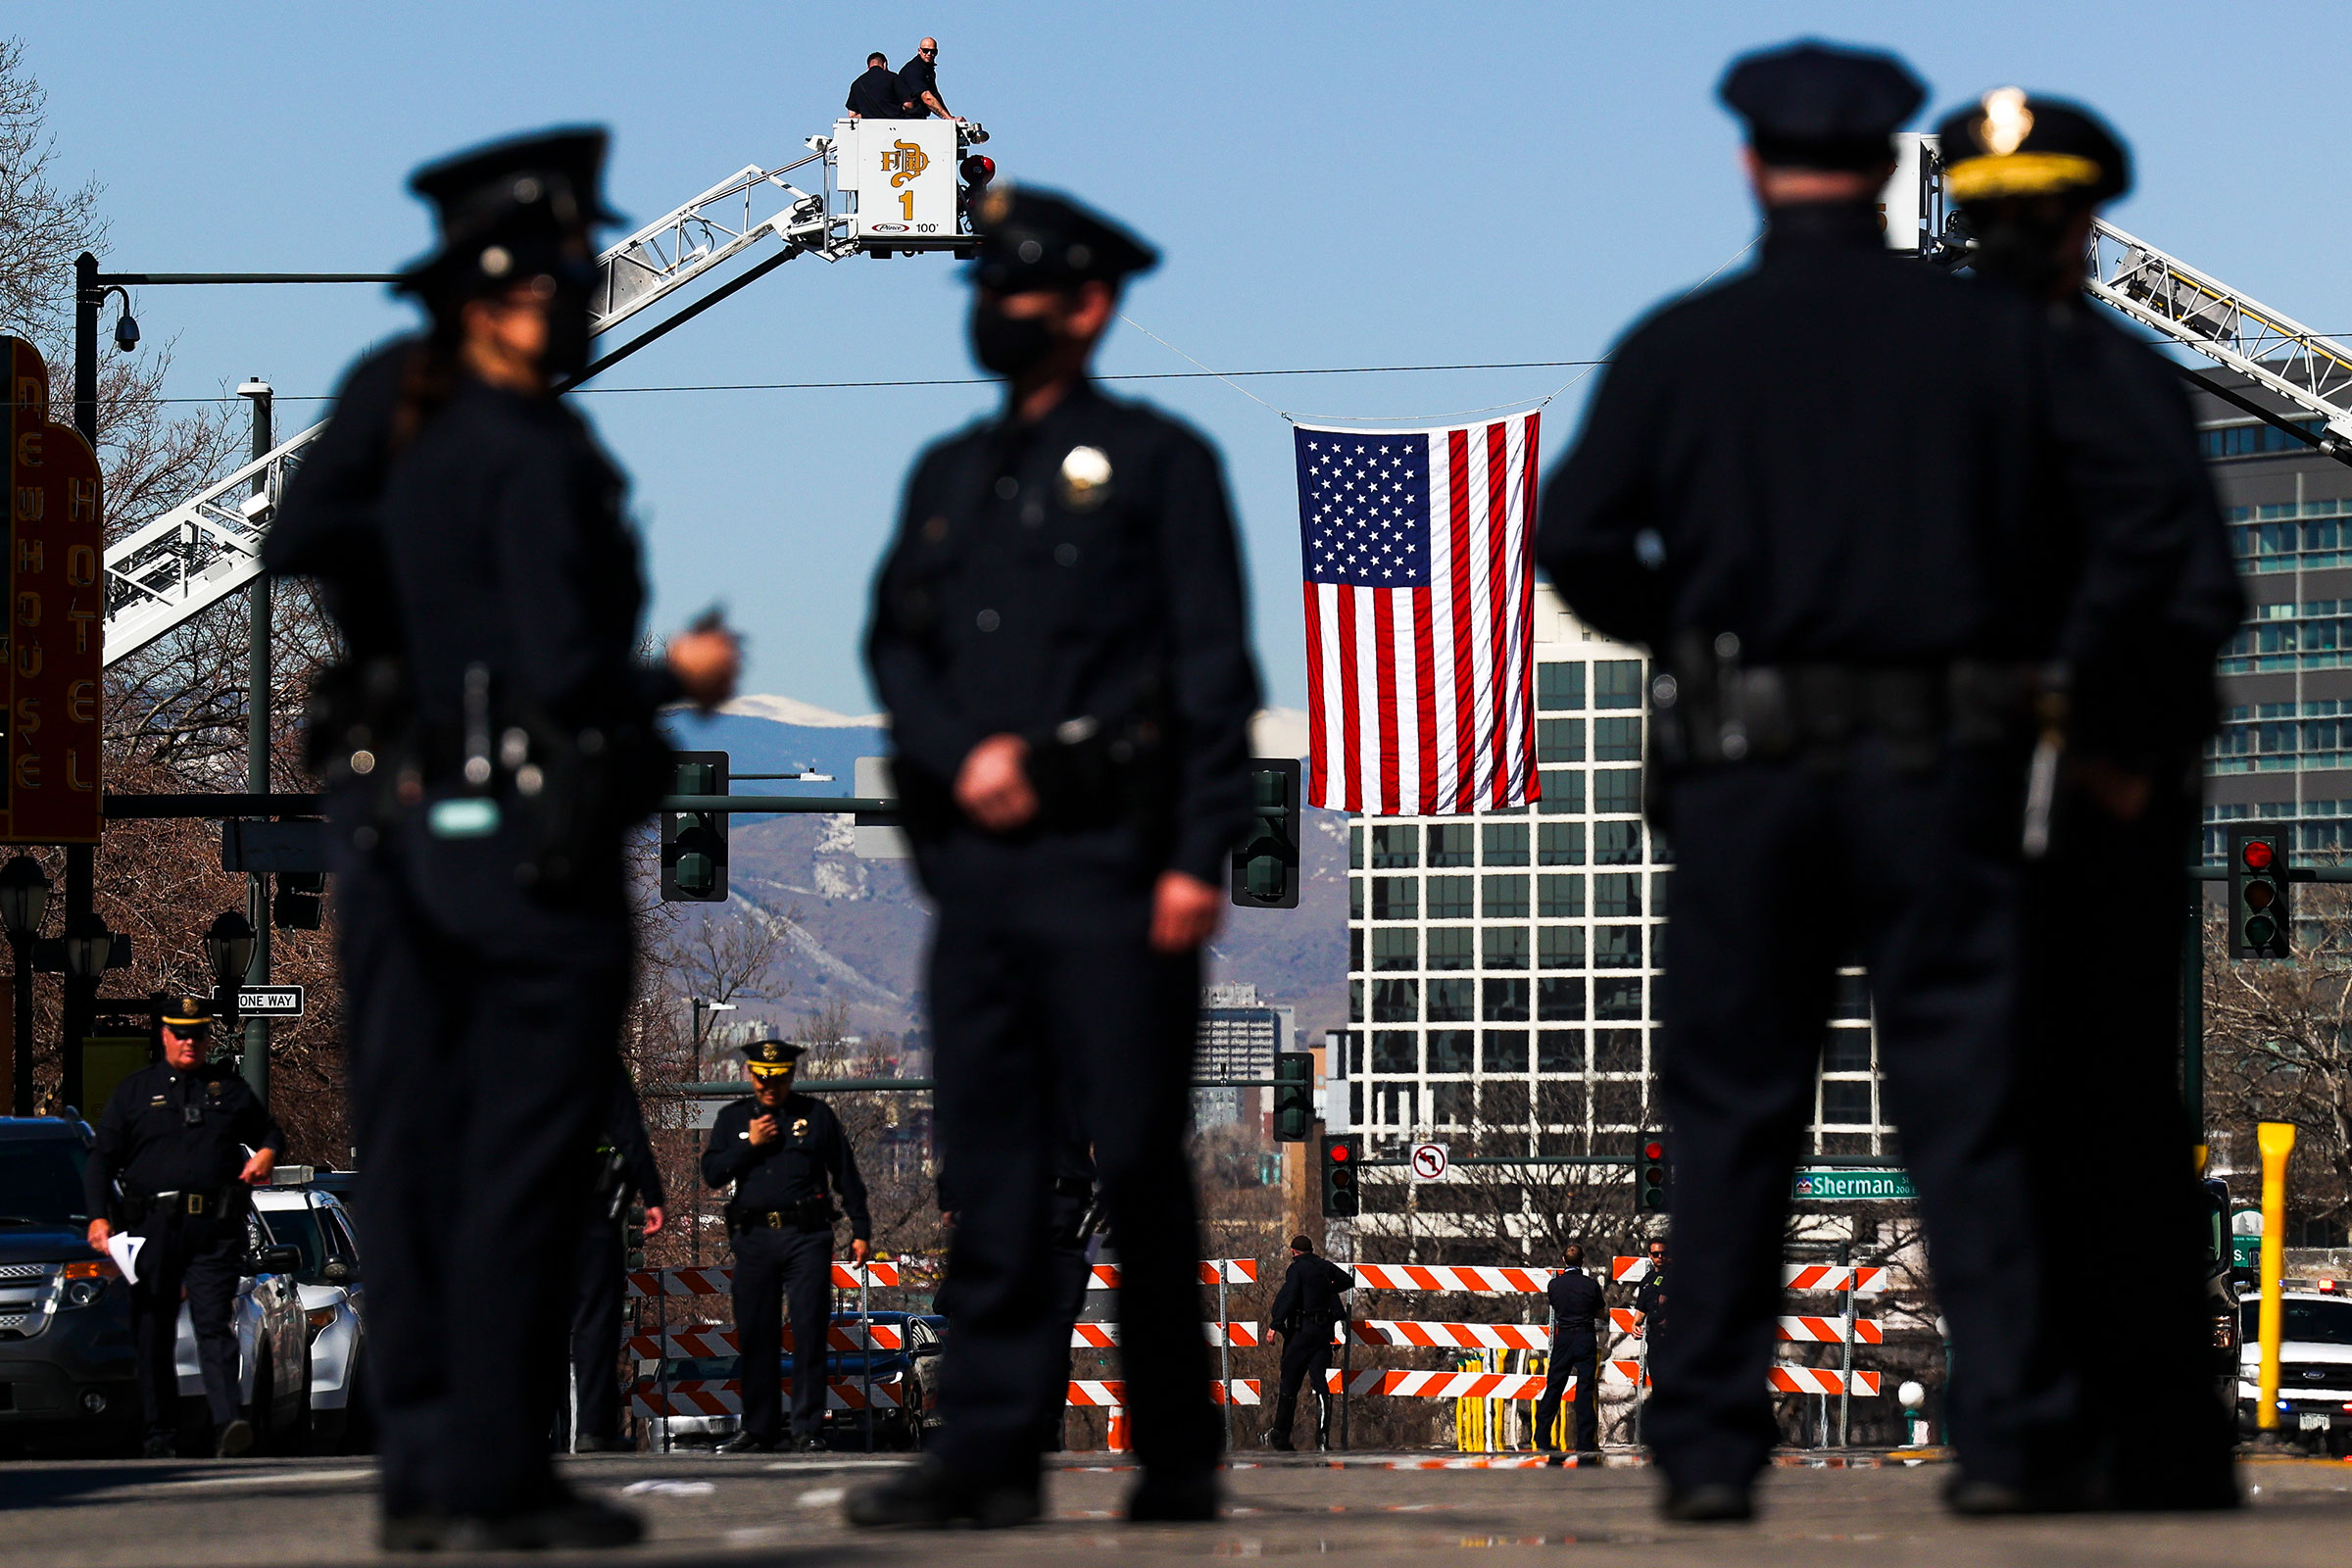 An American flag flies near the Cathedral Basilica of the Immaculate Conception during a funeral mass for slain Boulder Police officer Eric Talley on March 29, 2021 in Denver, Colorado. (Michael Ciaglo—Getty Images)